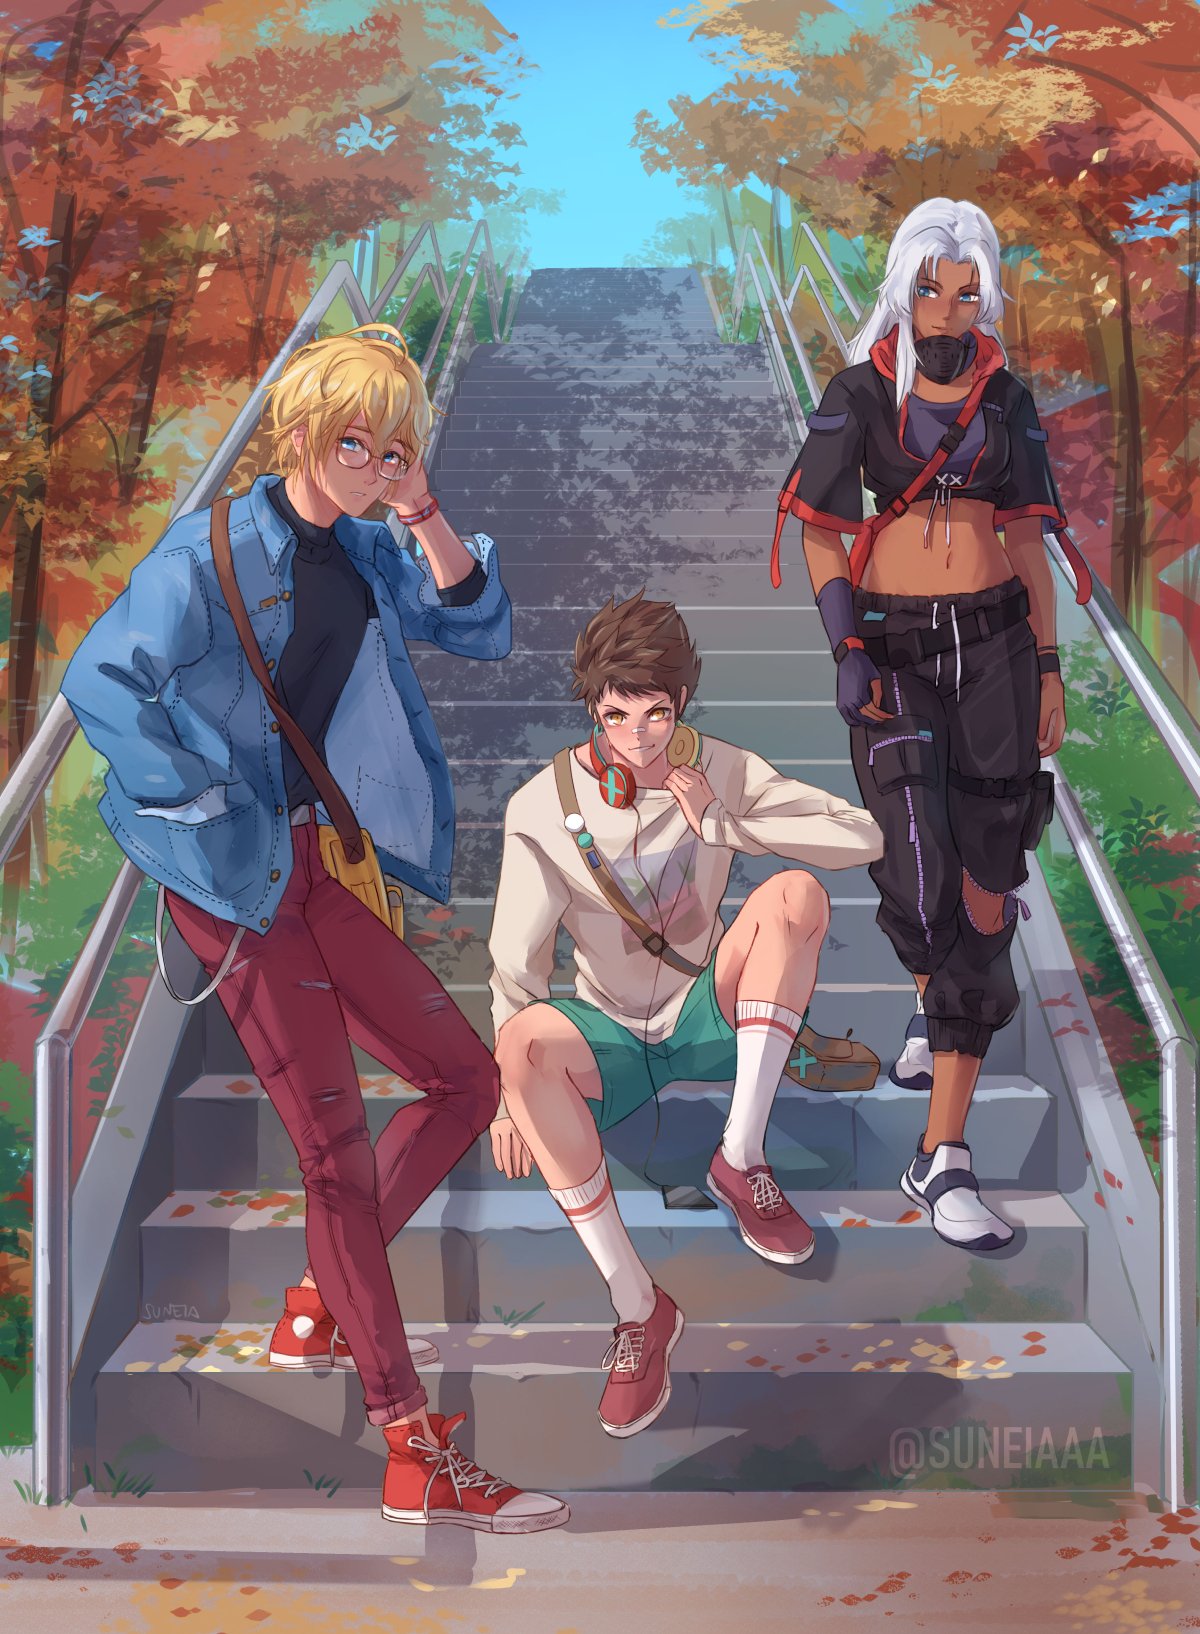 1girl 2boys autumn_leaves bag bandage_on_face black_jacket black_shirt blonde_hair blue_eyes blue_jacket brown_hair casual crop_top cropped_jacket dark_skin elma_(xenoblade_x) glasses green_shorts hand_in_pocket highres jacket leaning_on_rail long_sleeves midriff multiple_boys navel outdoors over_shoulder pants plant red_footwear red_pants rex_(xenoblade_2) shirt shoes shorts shulk sitting sky sneakers suneiaaa watermark white_hair white_legwear white_shirt xenoblade_(series) xenoblade_1 xenoblade_2 xenoblade_chronicles_x